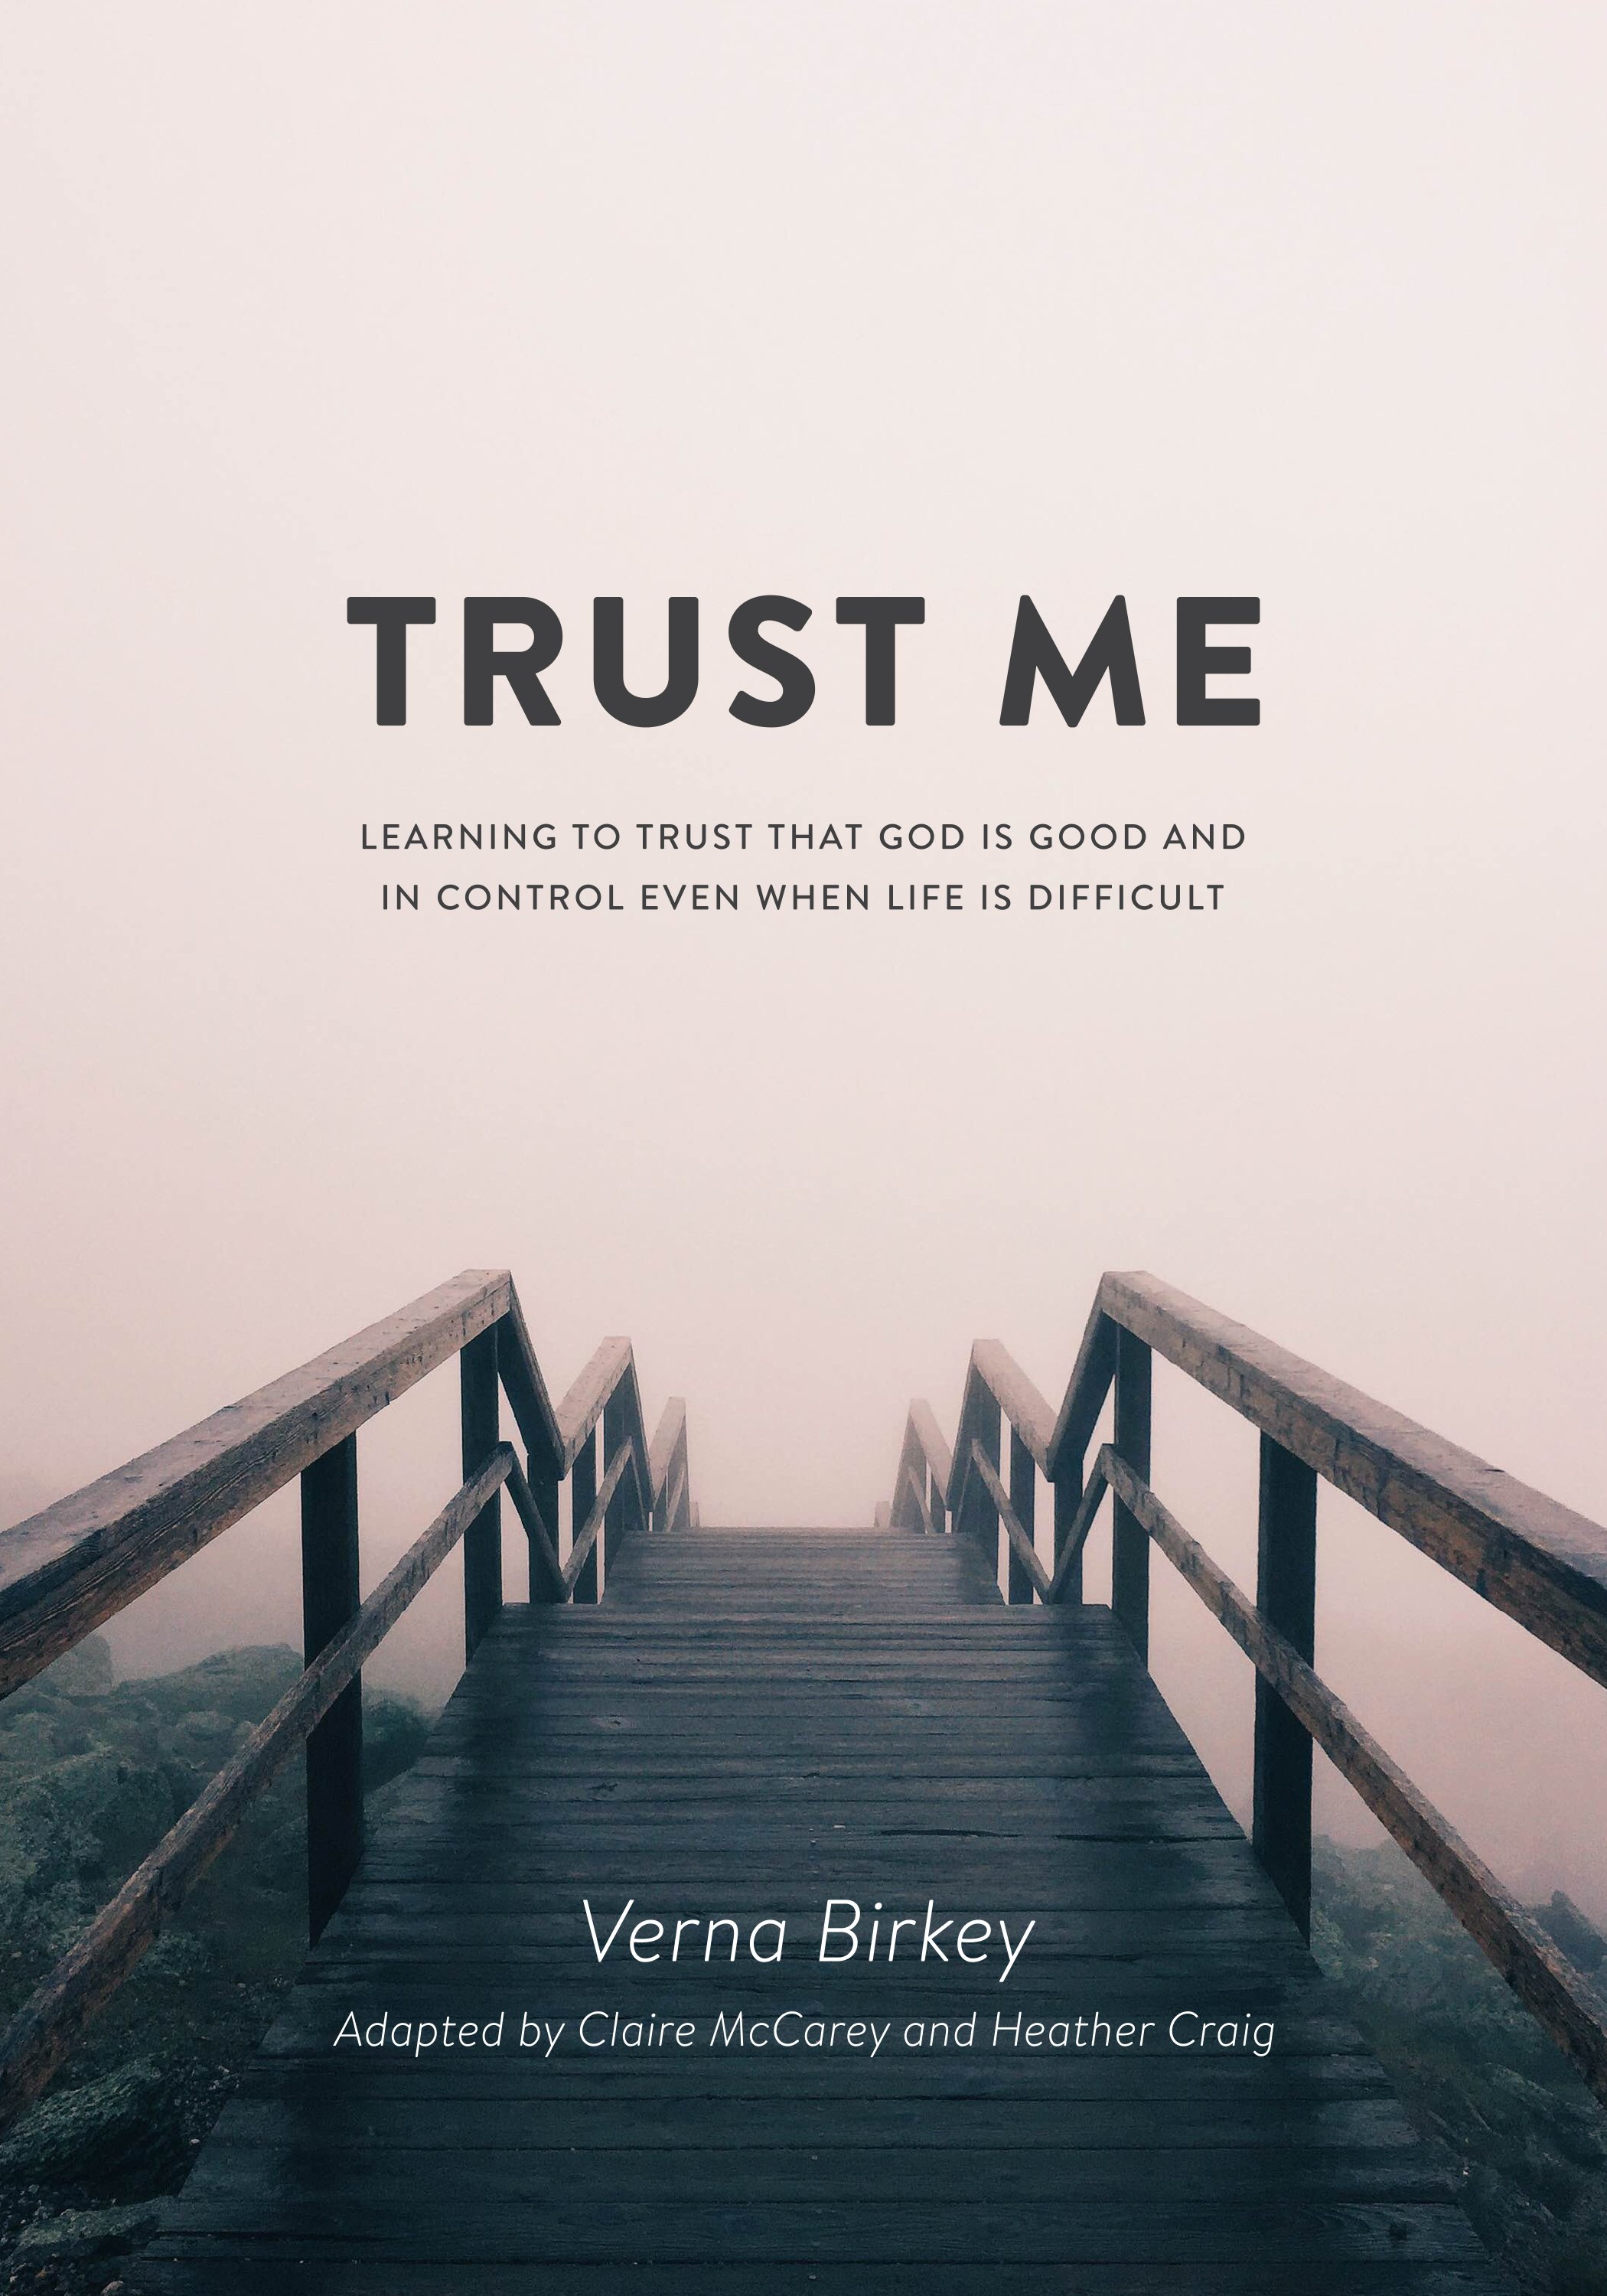 Trust Me: Learning to Trust that God is Good and in Control Even When